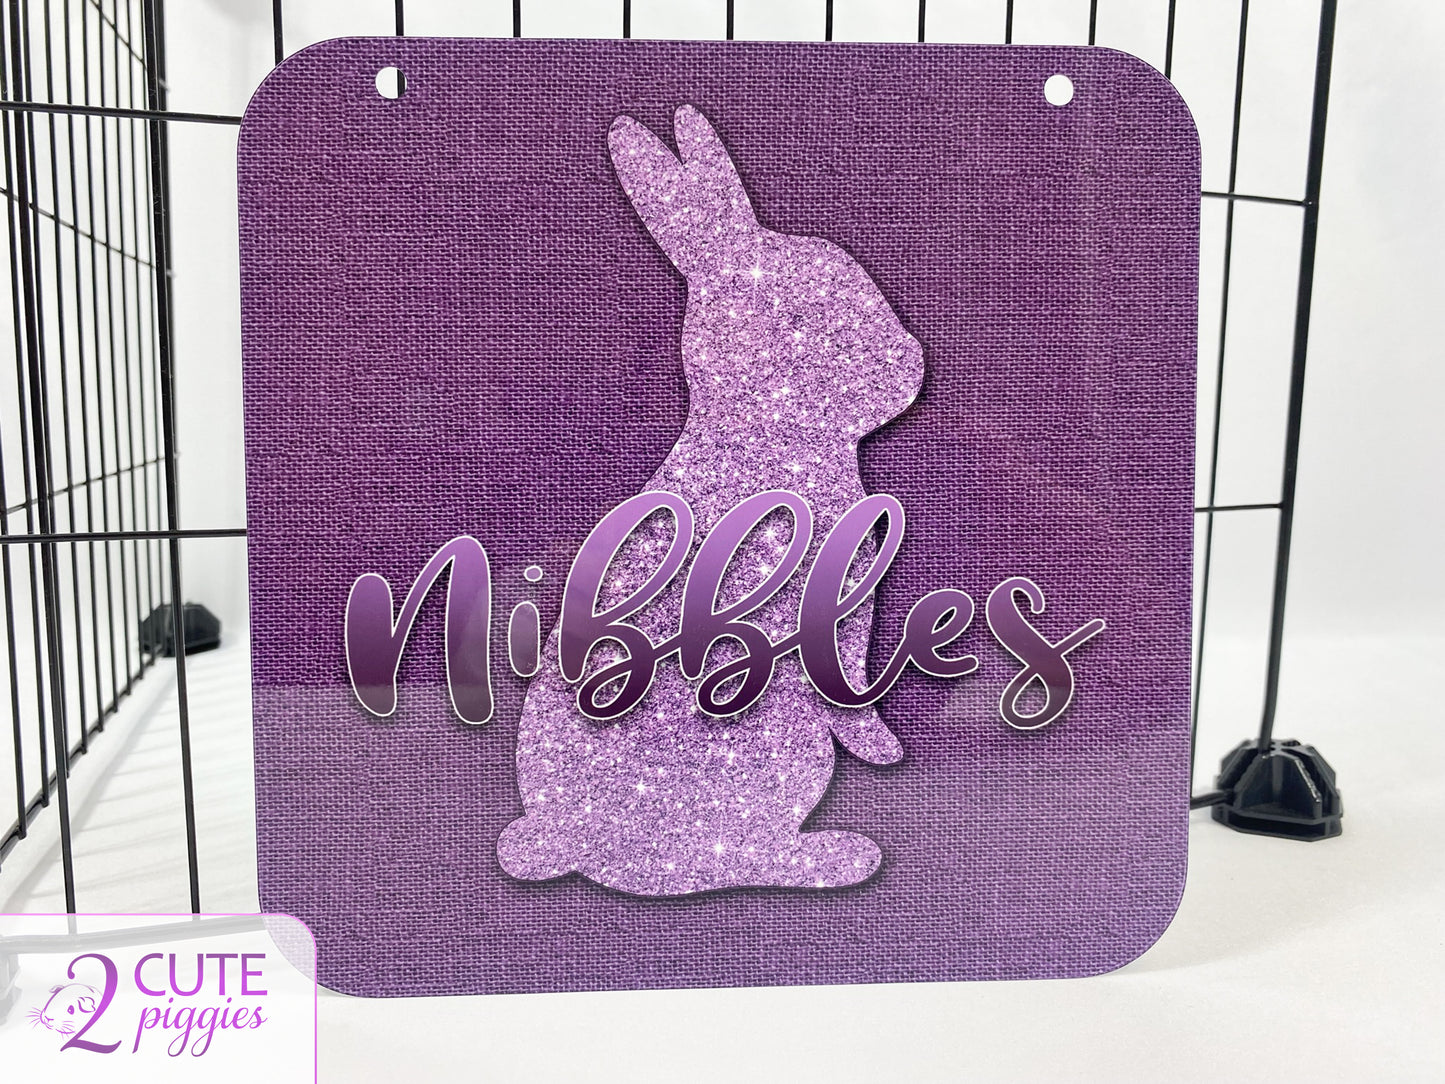 Rabbit Name Tag - Upright Ears Rabbit Silhouette - 8"x8"